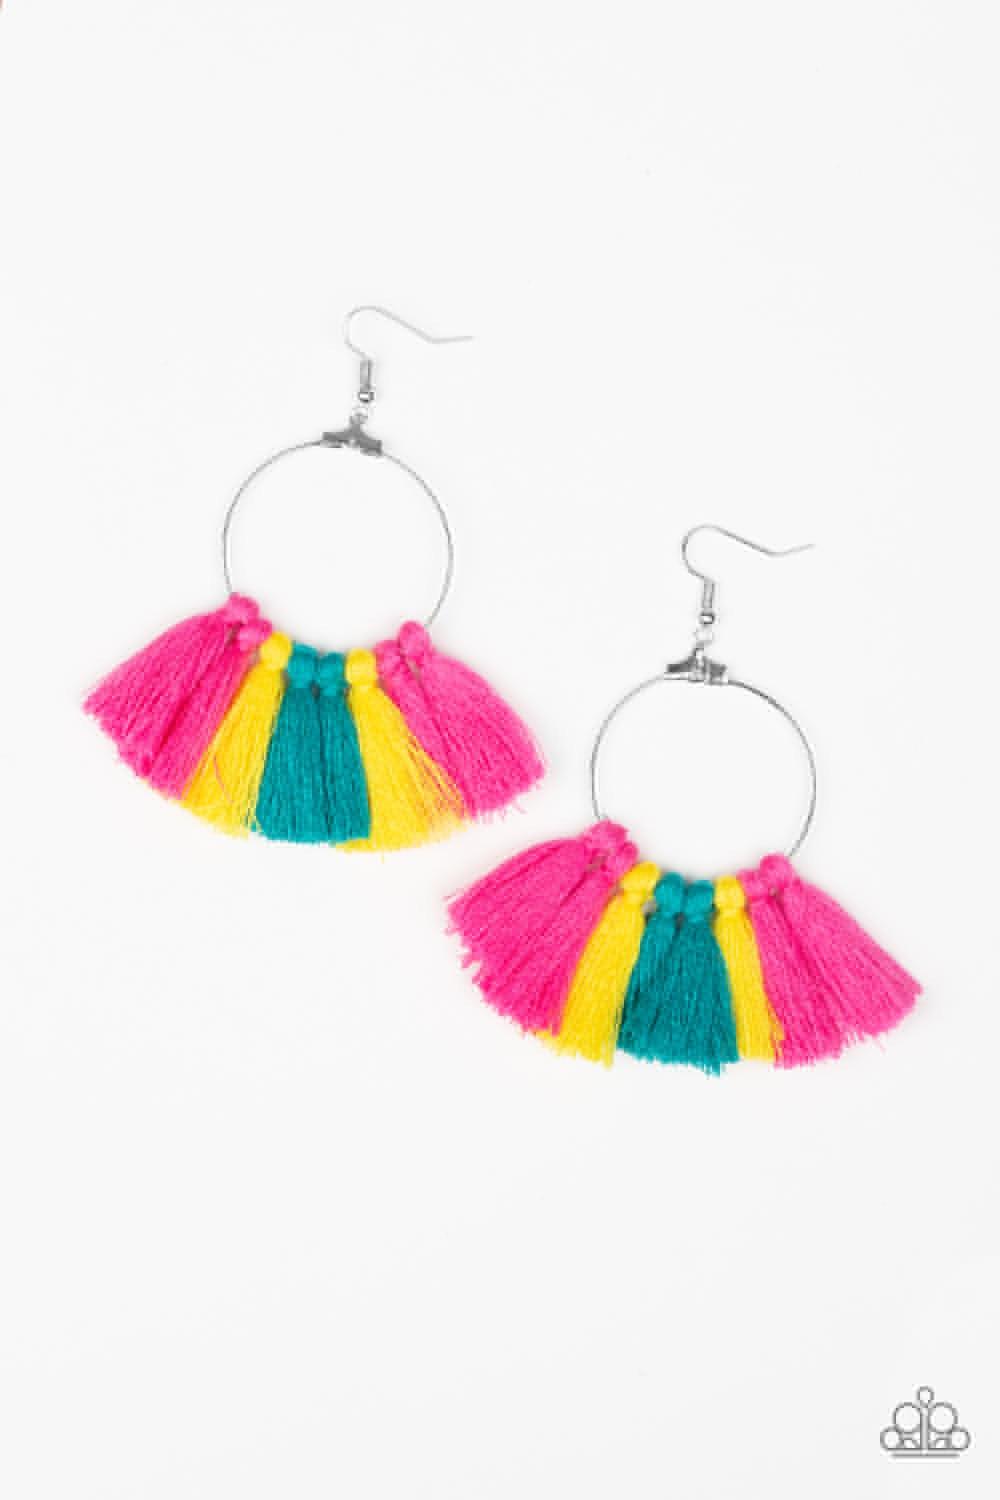 Paparazzi Accessories Peruvian Princess - Multi A collection of green, pink, and yellow threaded tassels are knotted around the bottom of a shimmery silver hoop, creating a flirtatious fringe. Earring attaches to a standard fishhook fitting.